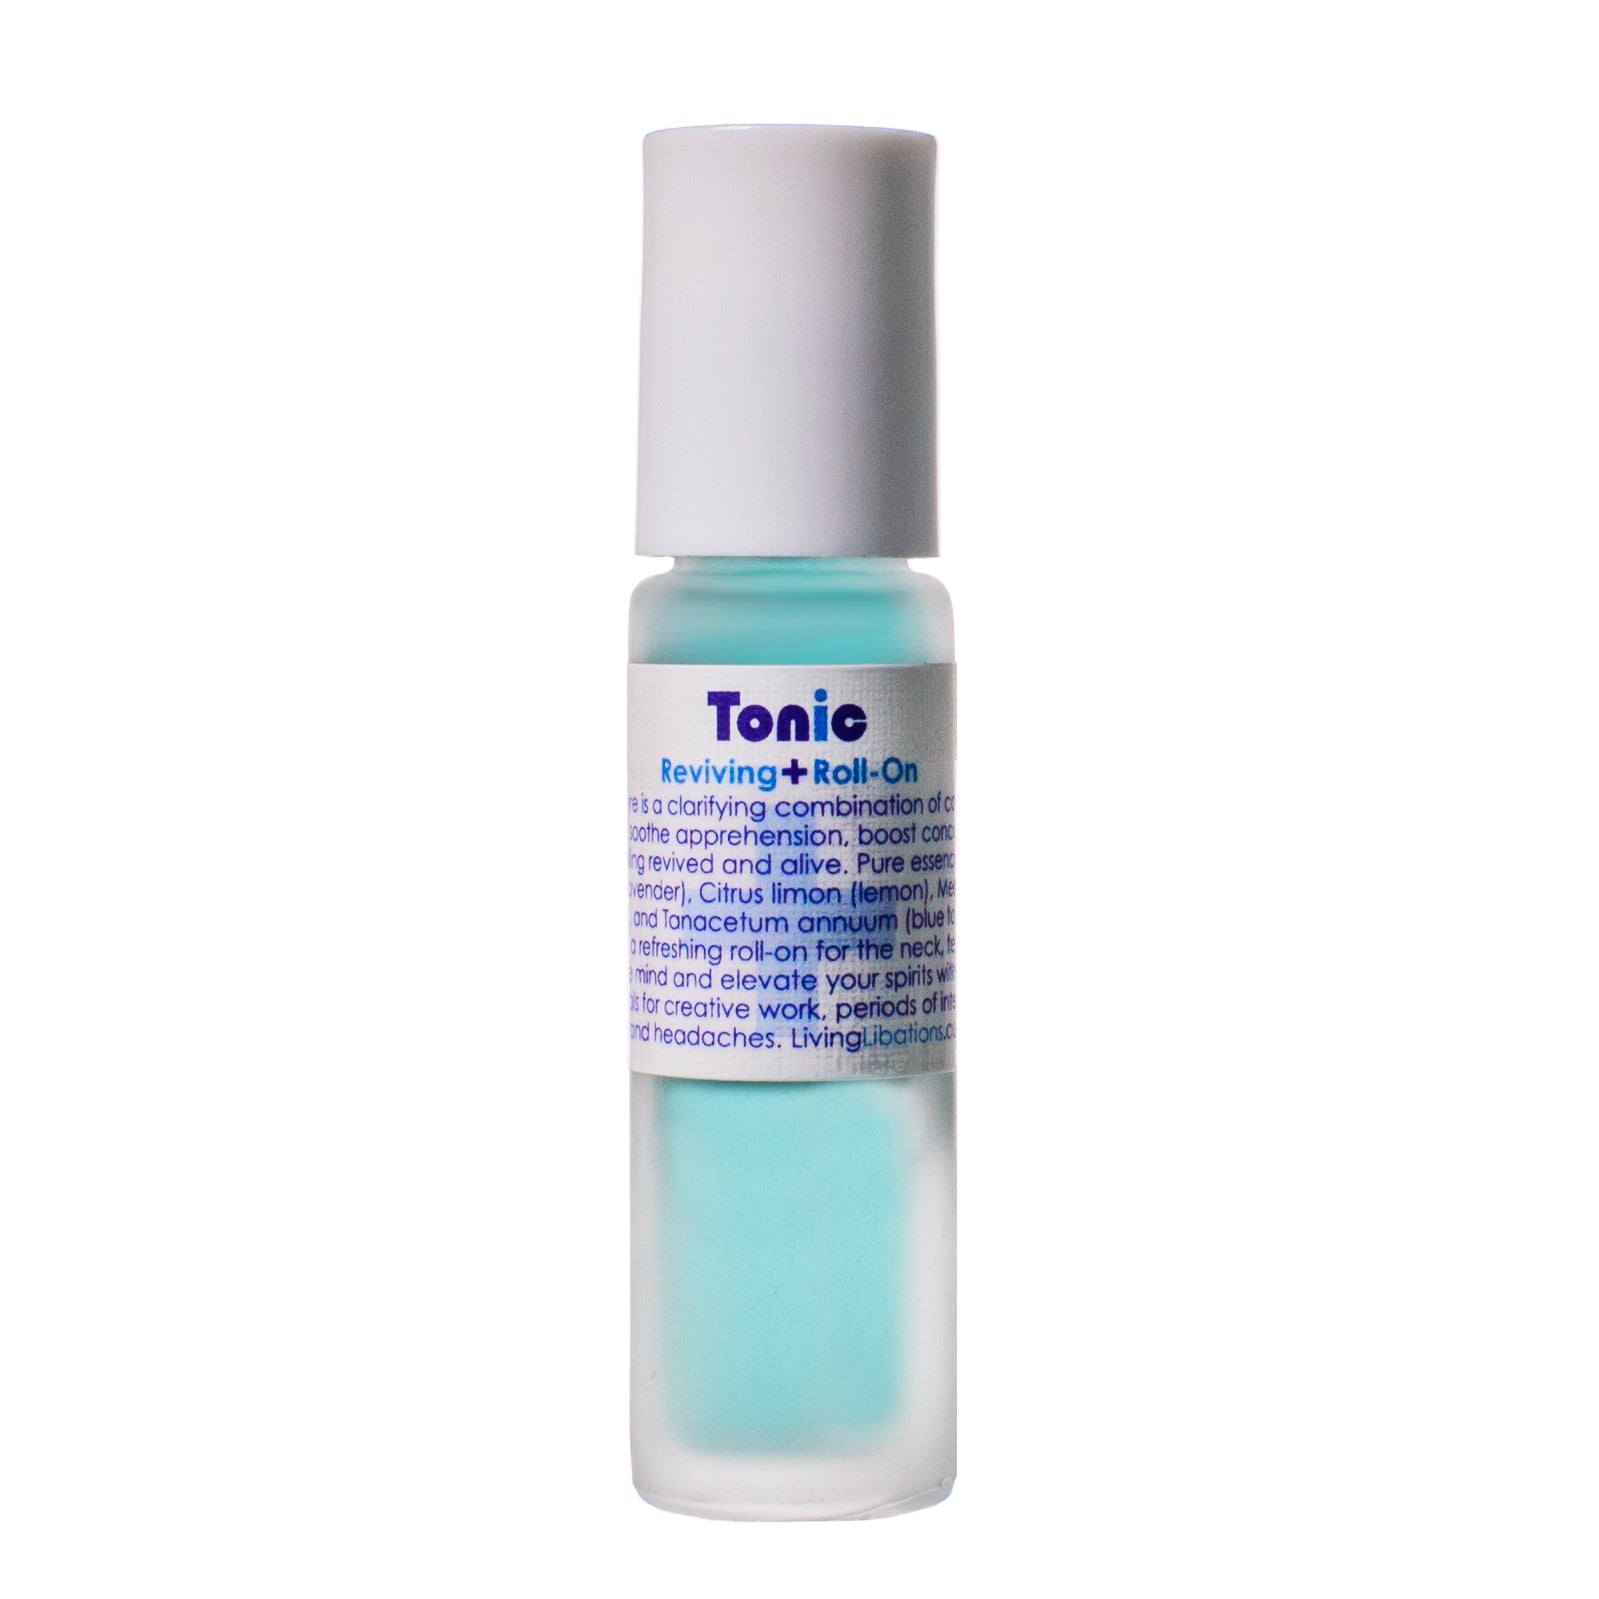 Tonic Reviving Roll-On, 10ml